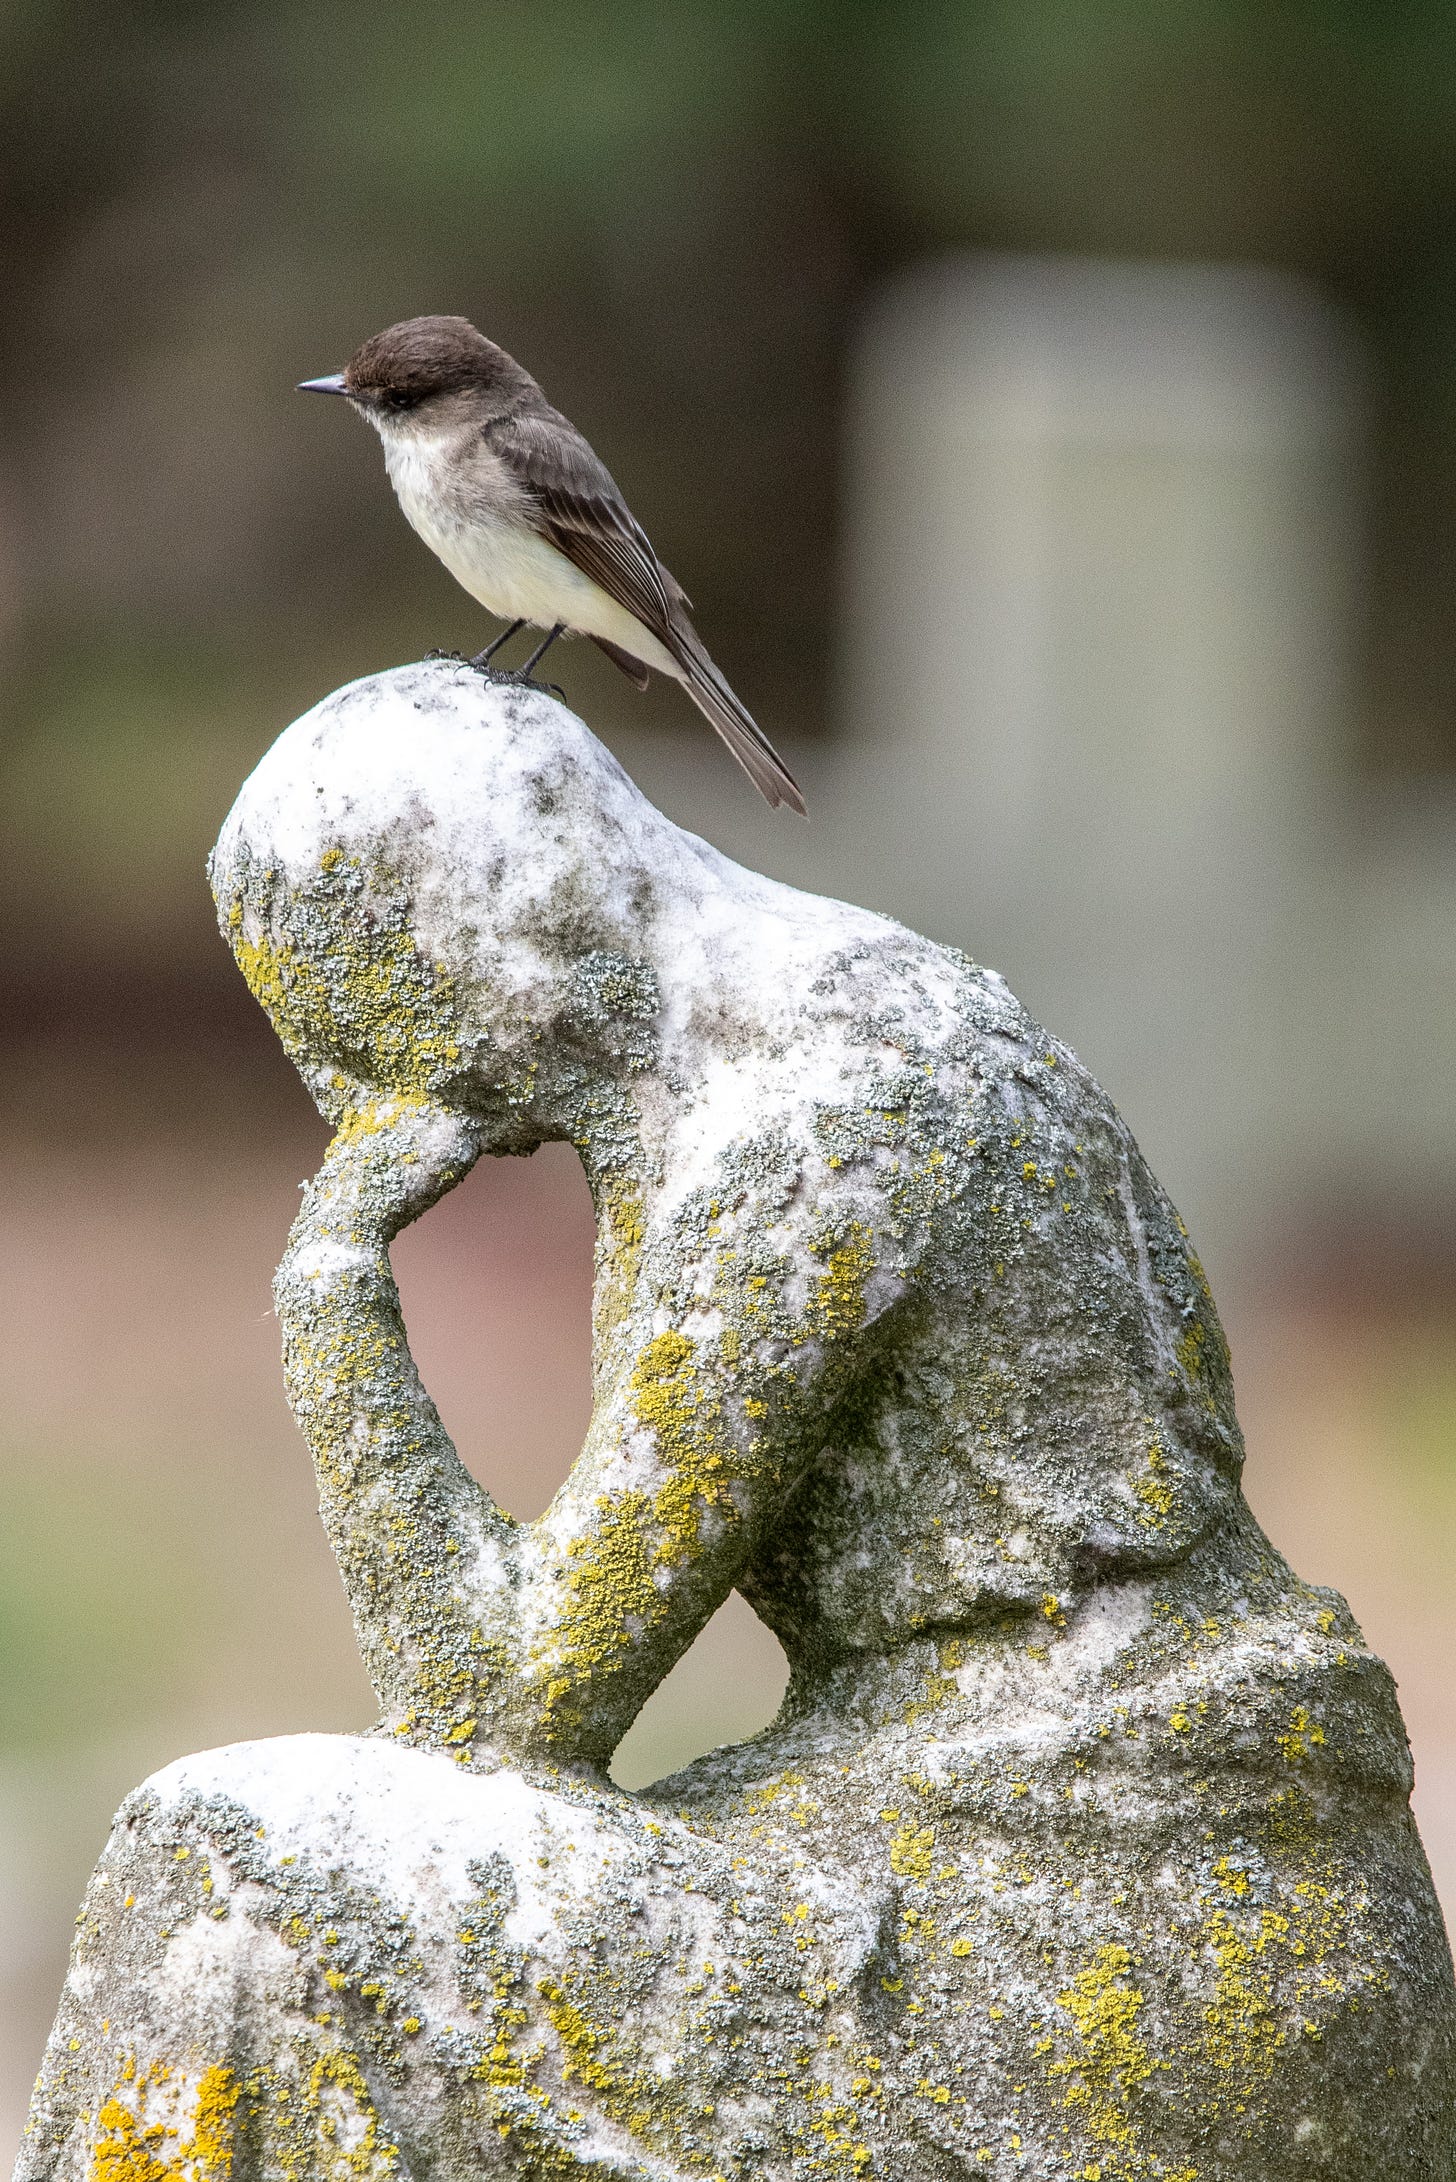 An eastern phoebe stands on top of a funerary statue of a mourning woman